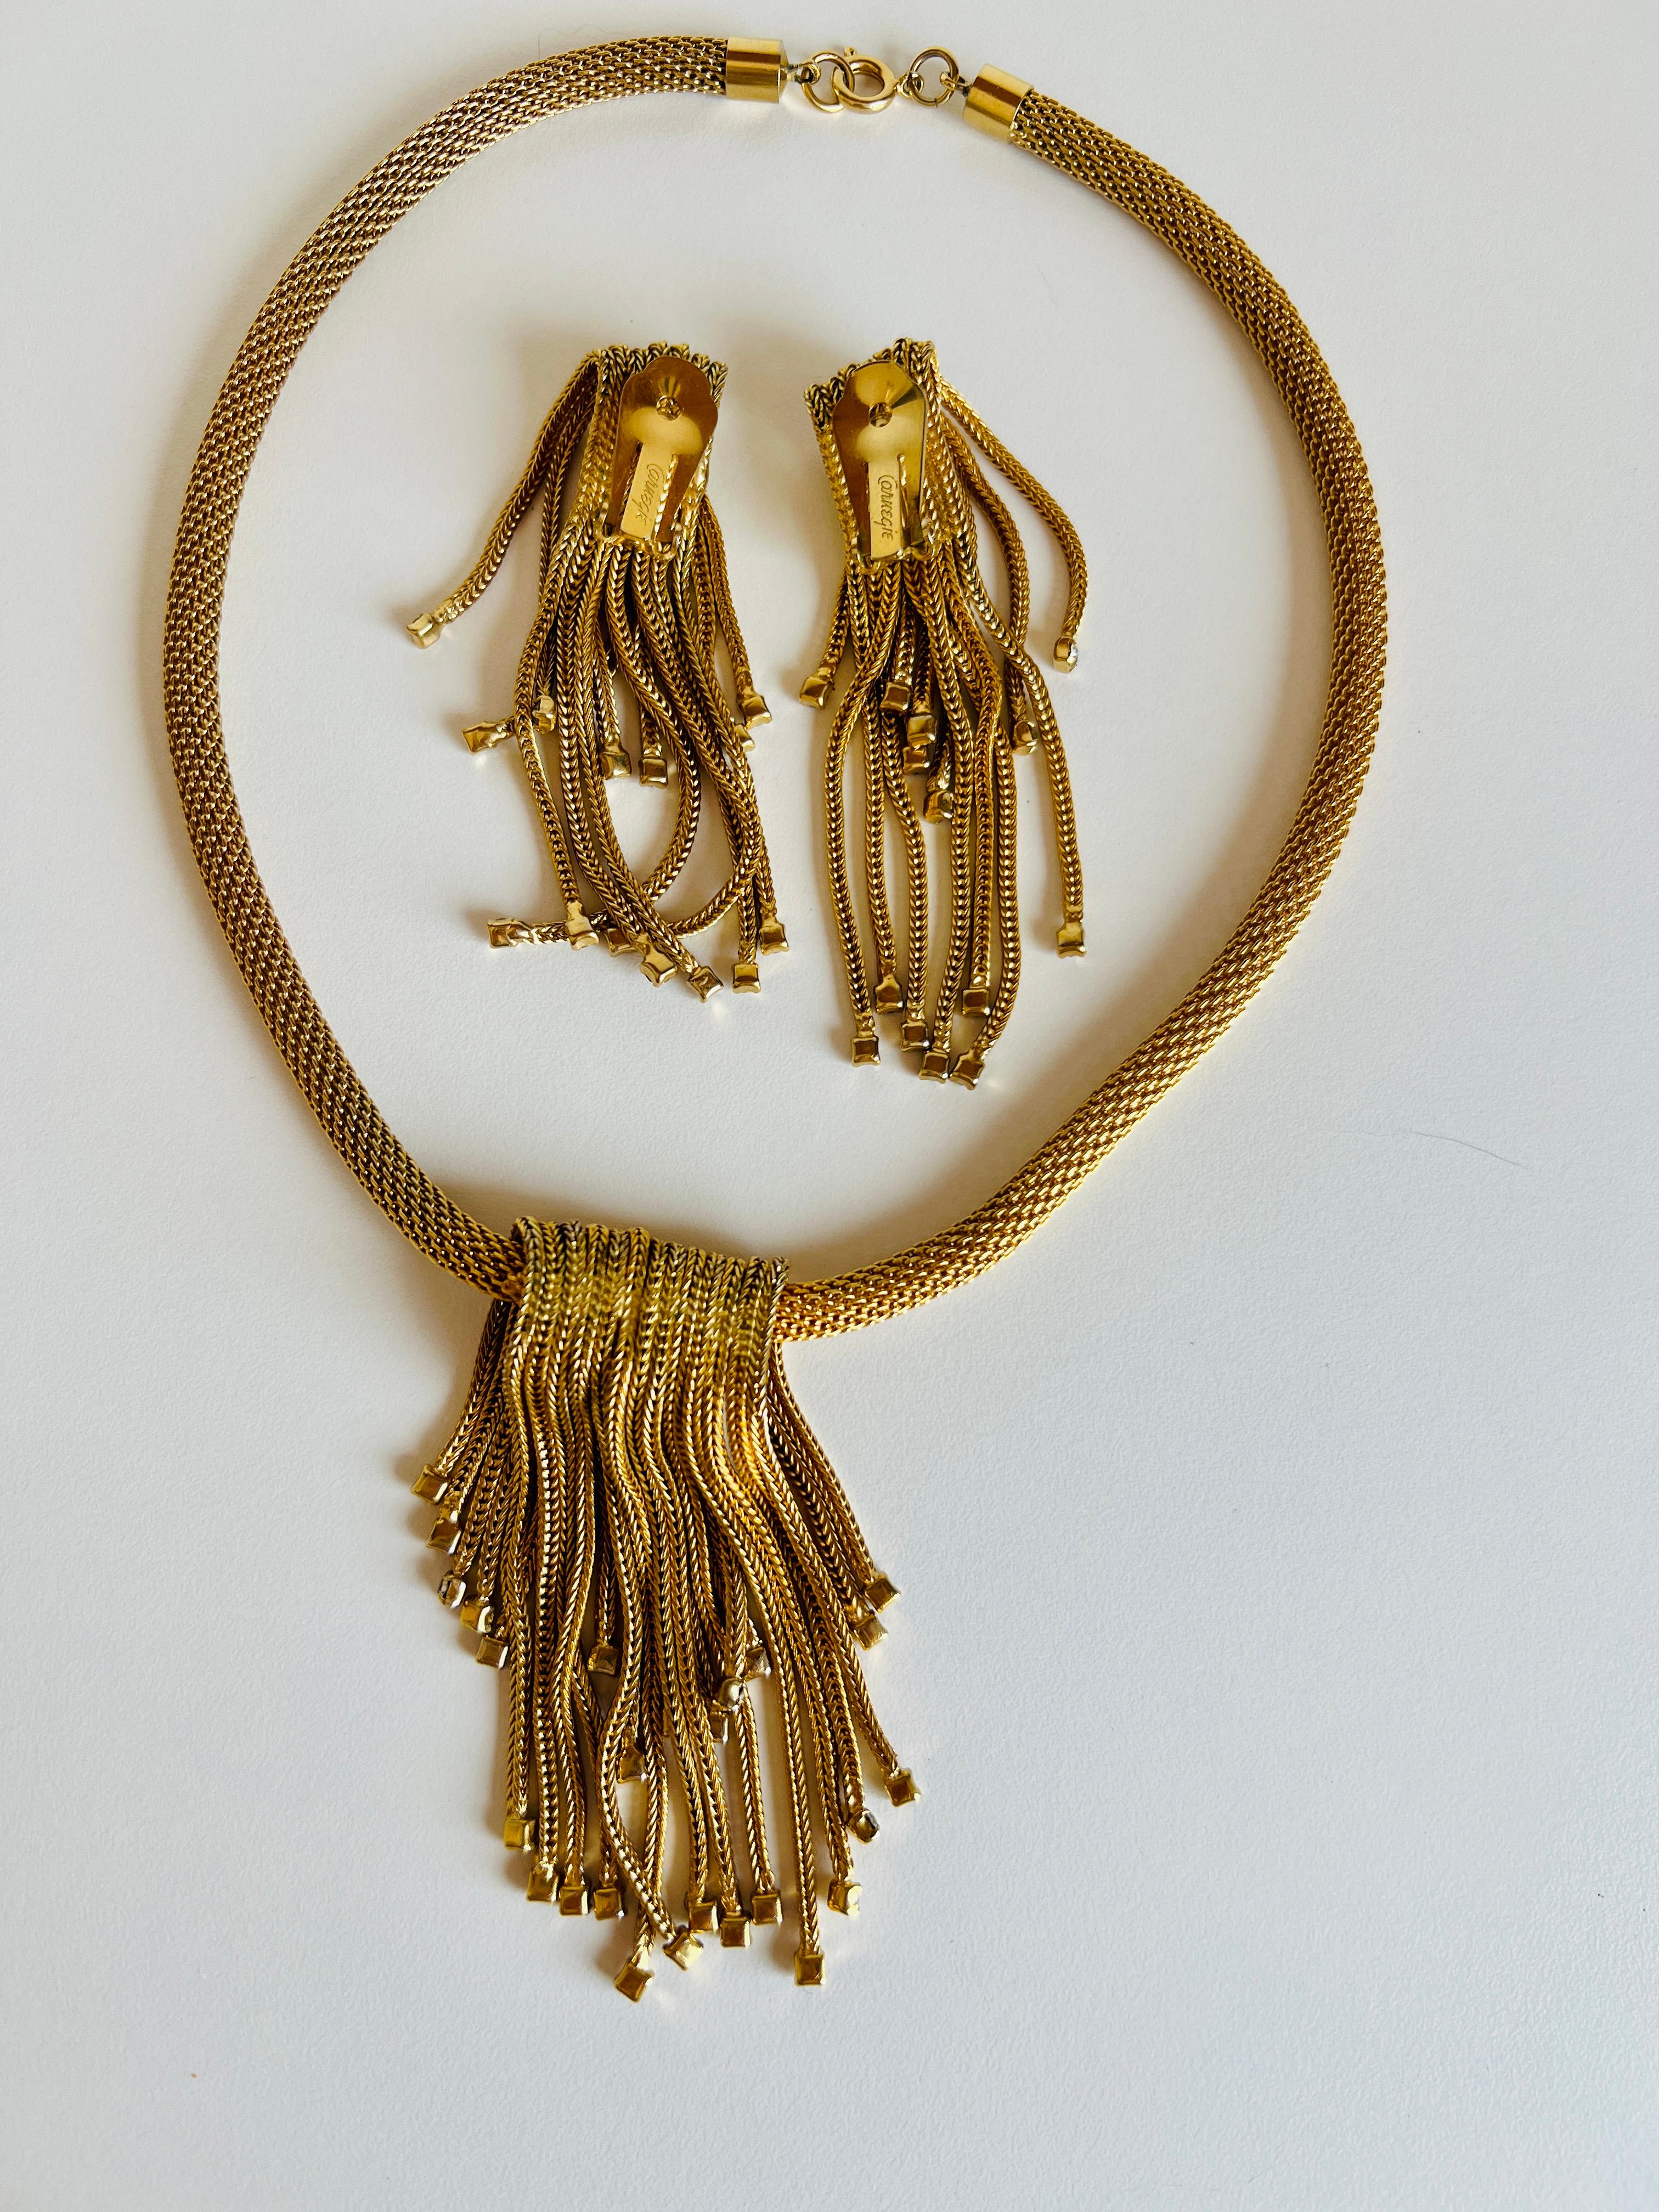 Hattie Carnegie Gold Mesh Chain Waterfall Tassel Choker Necklace Earrings Set In Good Condition For Sale In Sausalito, CA